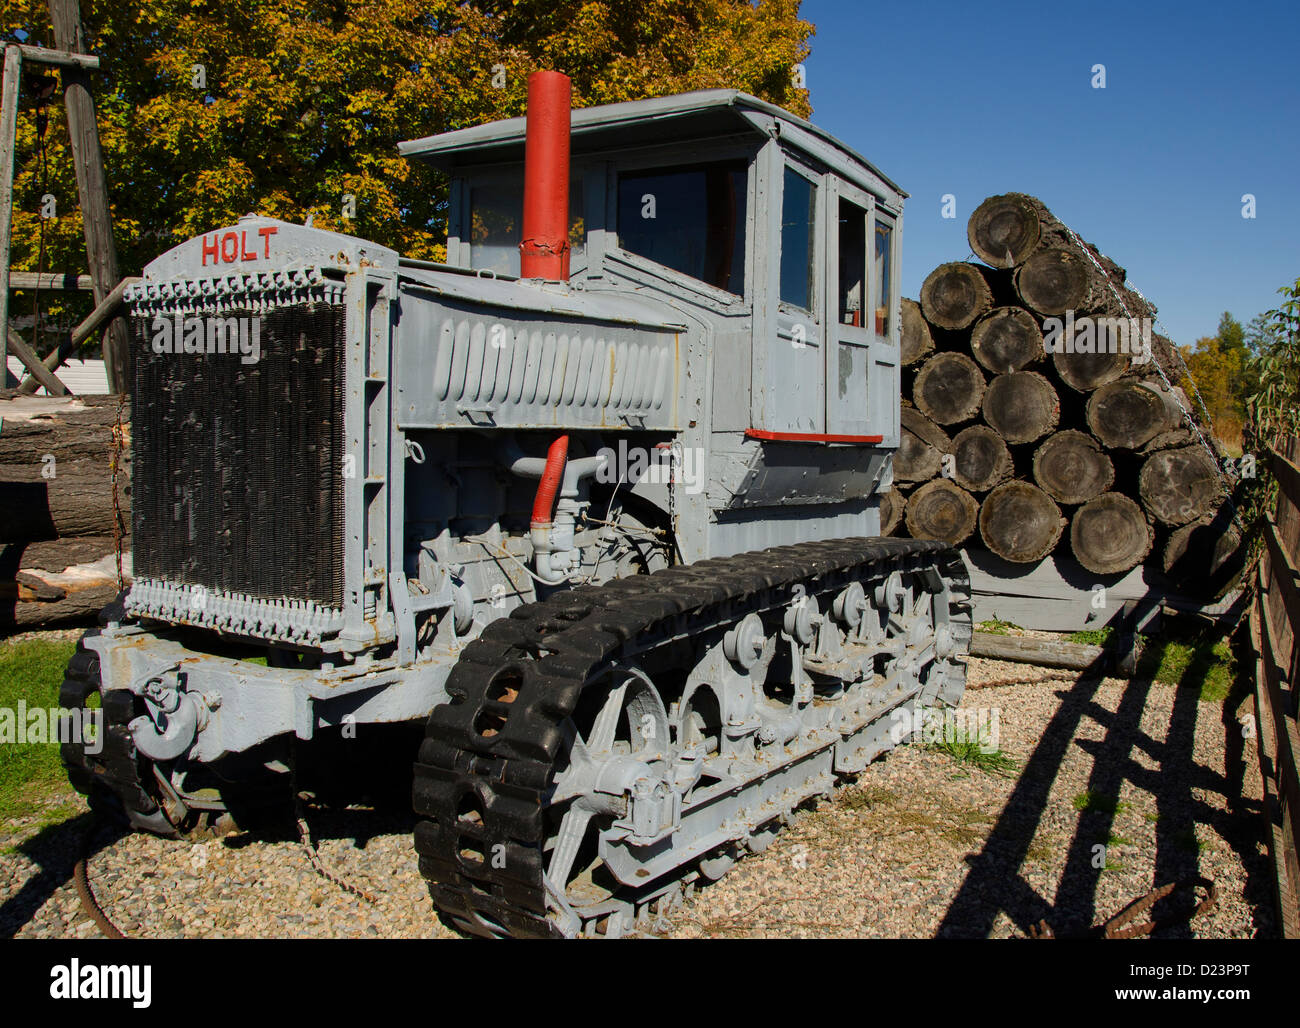 The Lumberjack Steam Train in Laona, Wisconsin is a vintage steam train which takes visitors to the Camp 5 Logging Camp. Stock Photo